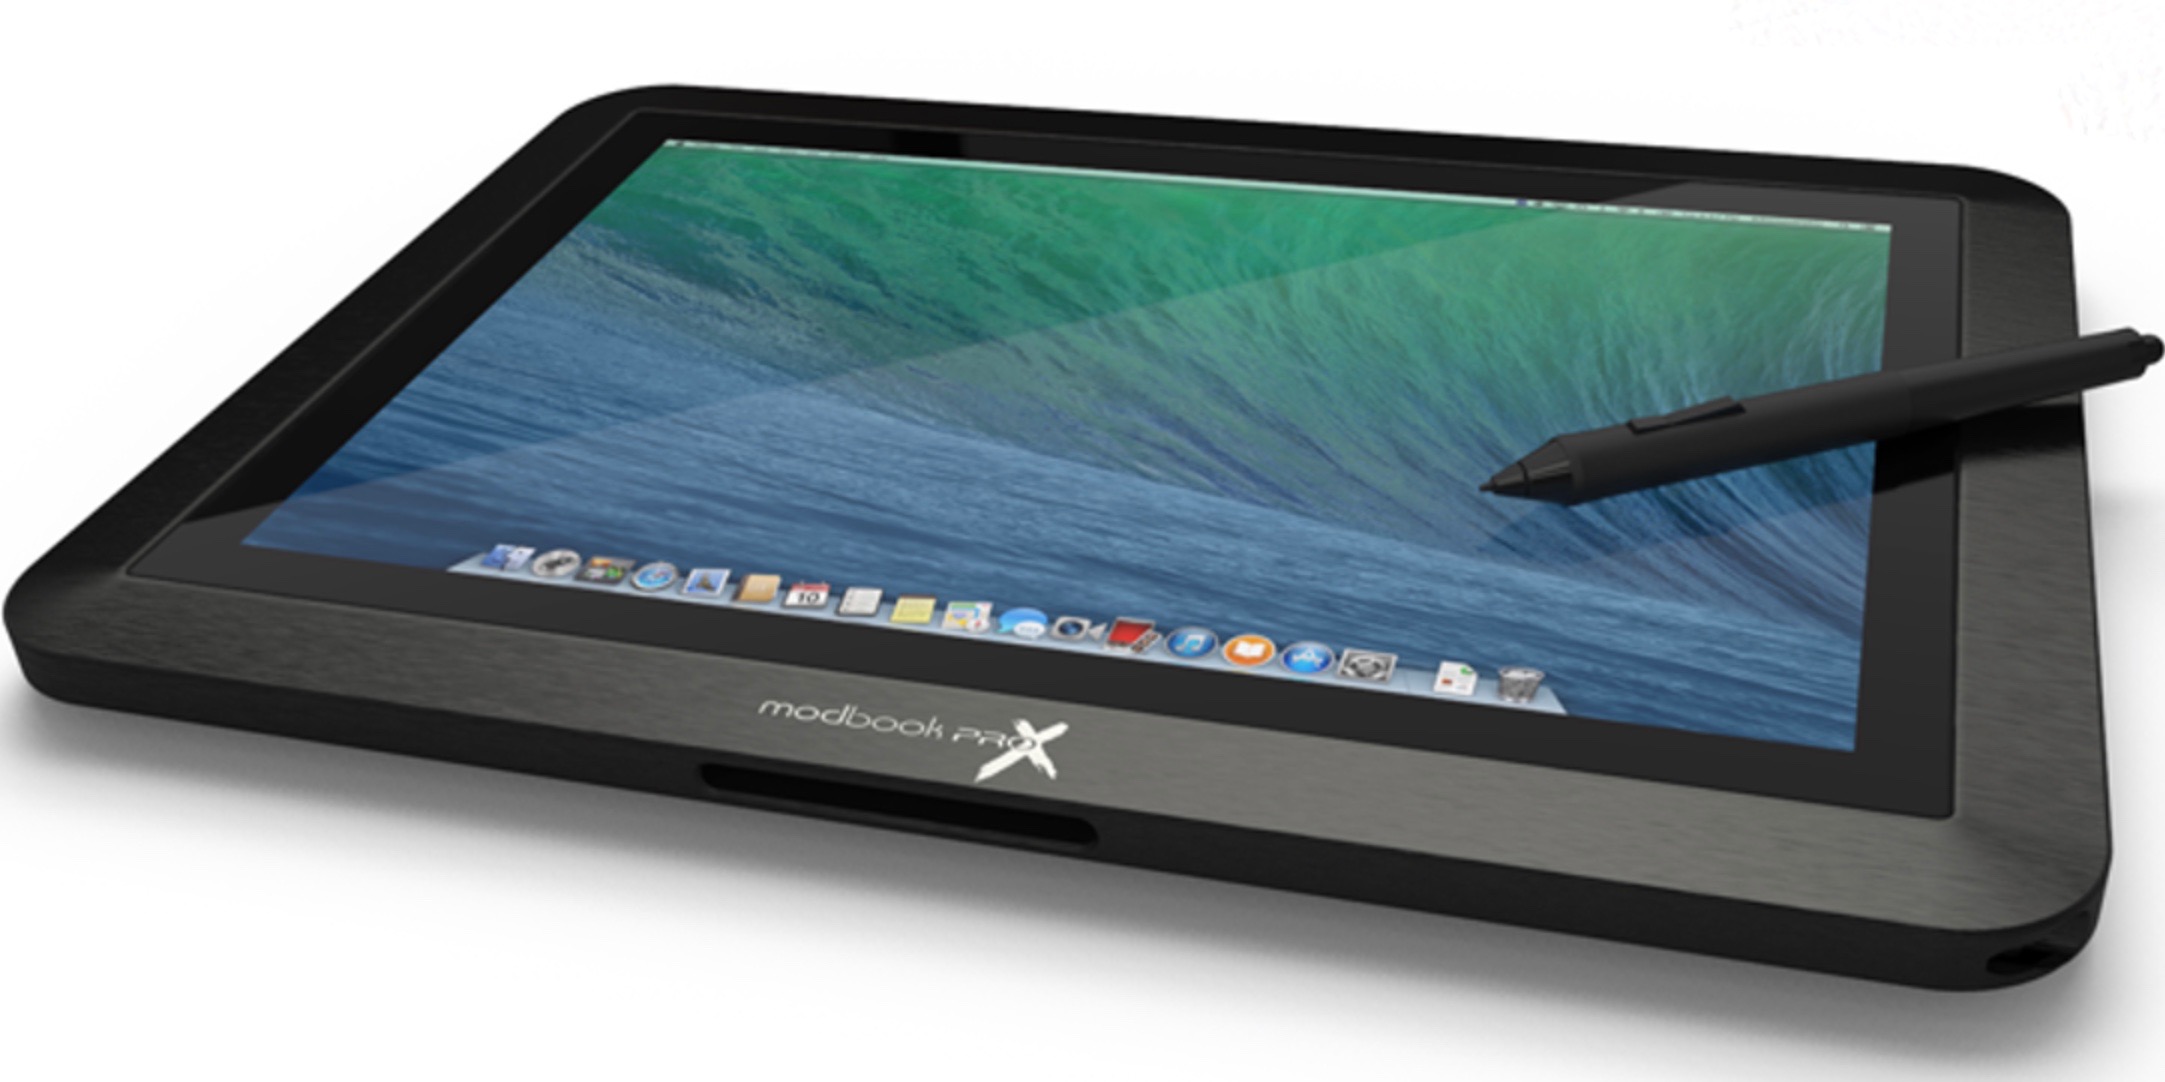 converged os x on tablet